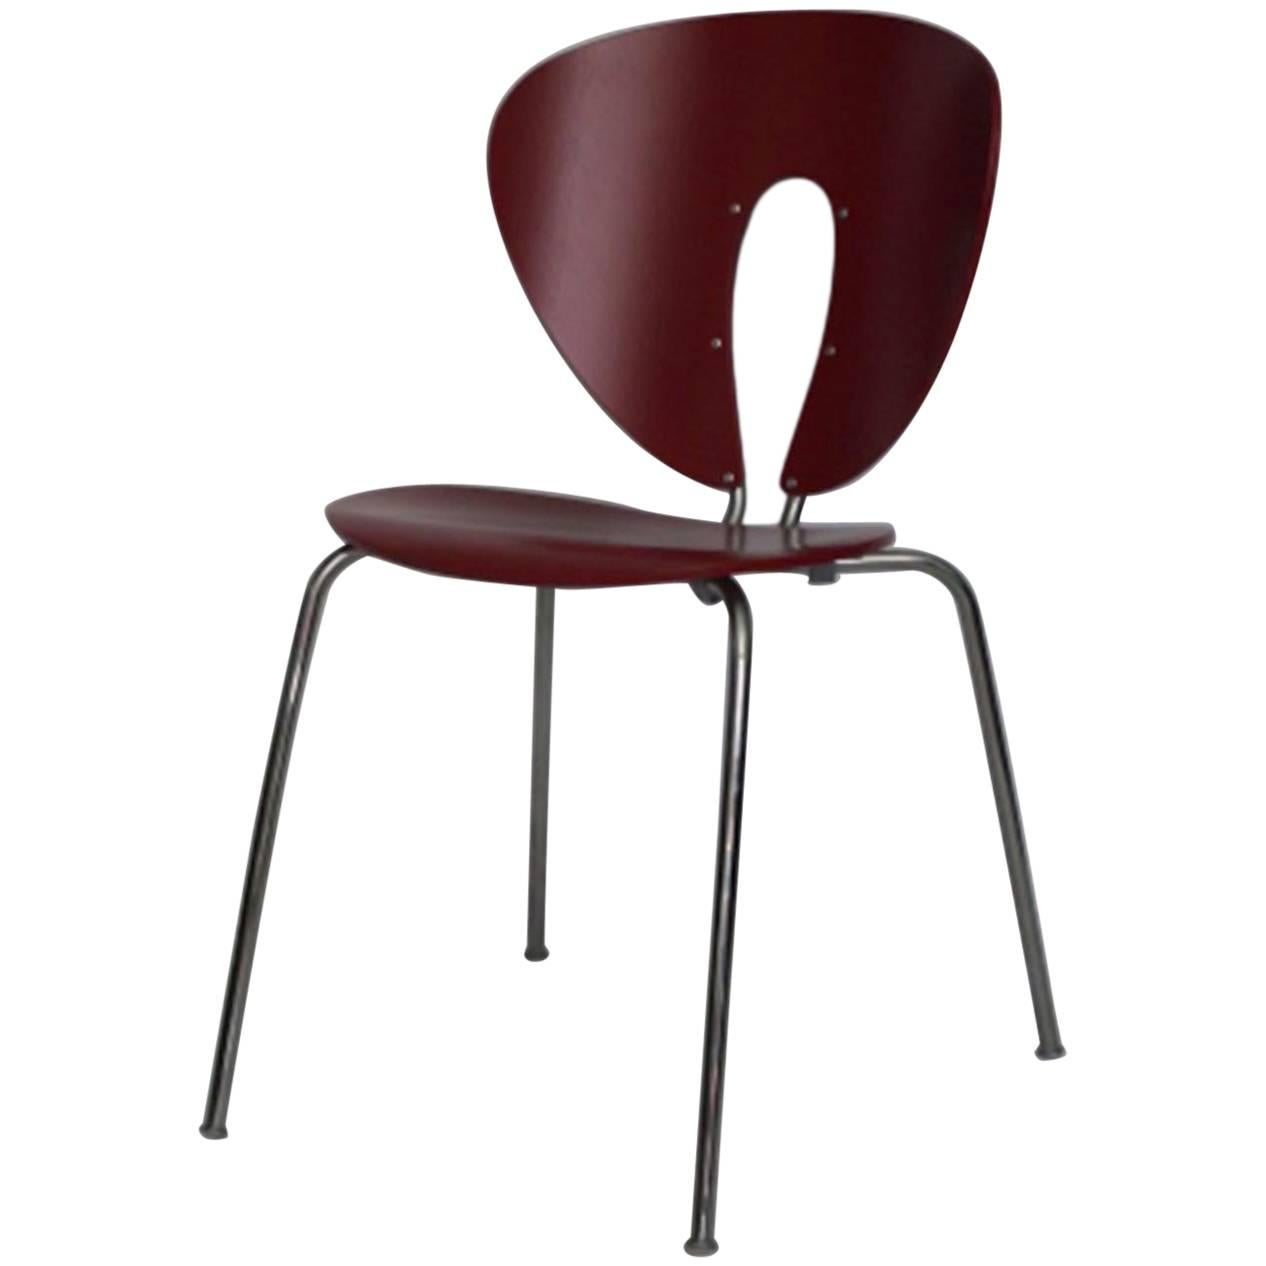 Red Globus Chair by Jesus Gasca for Stua